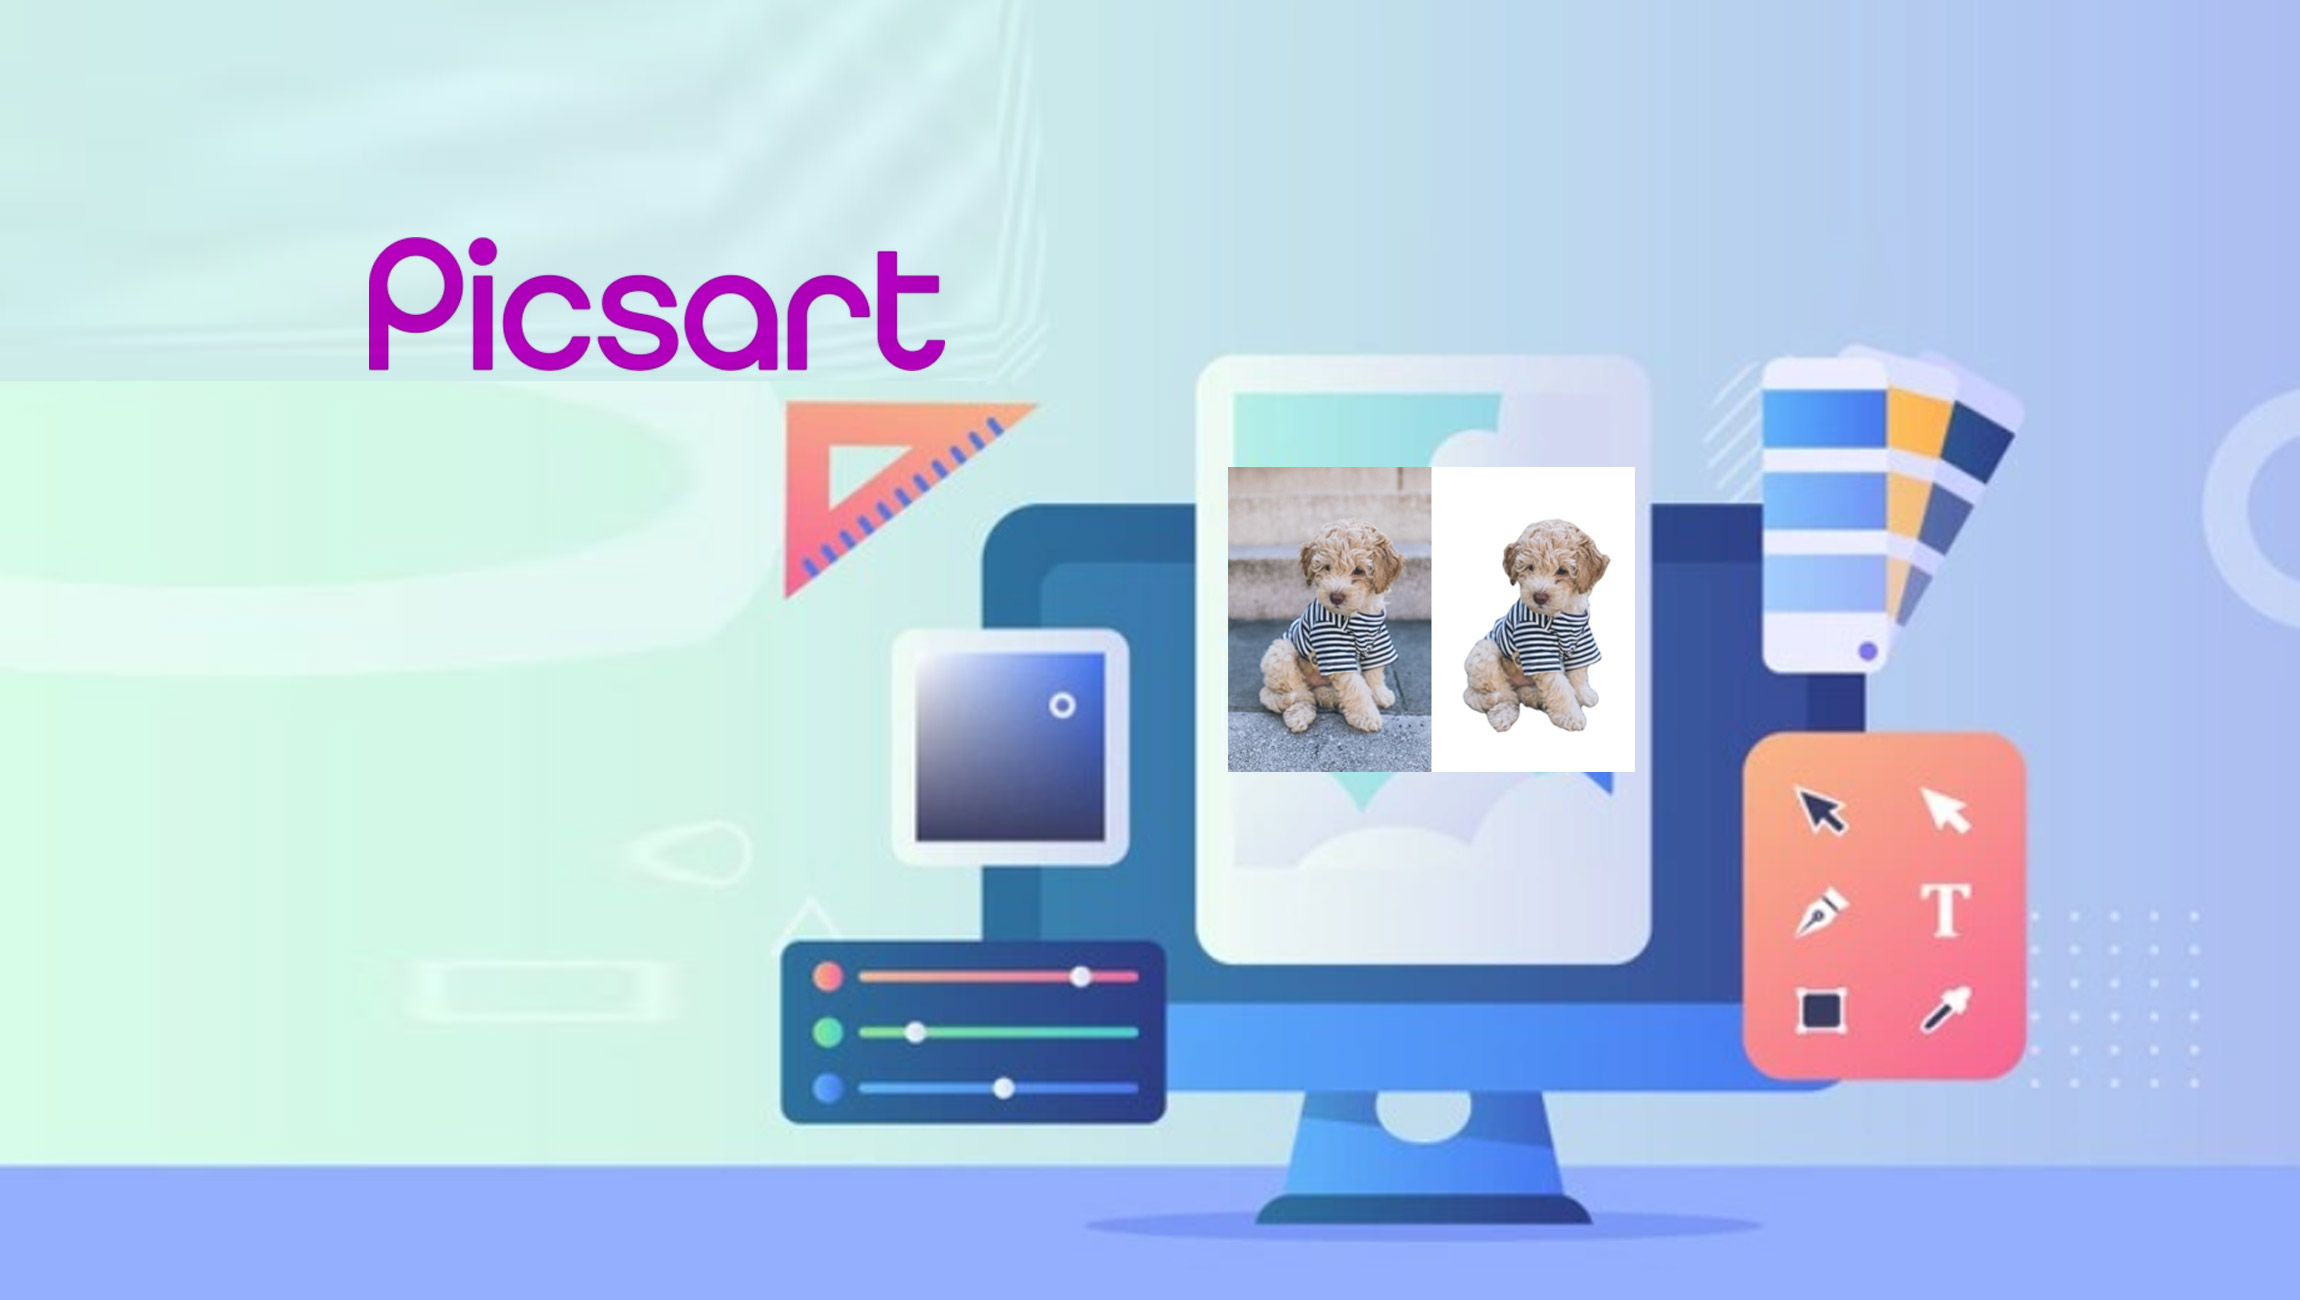 Picsart Launches AI Image Generator and AI Writer Tools to Empower the Creative Workflow 1